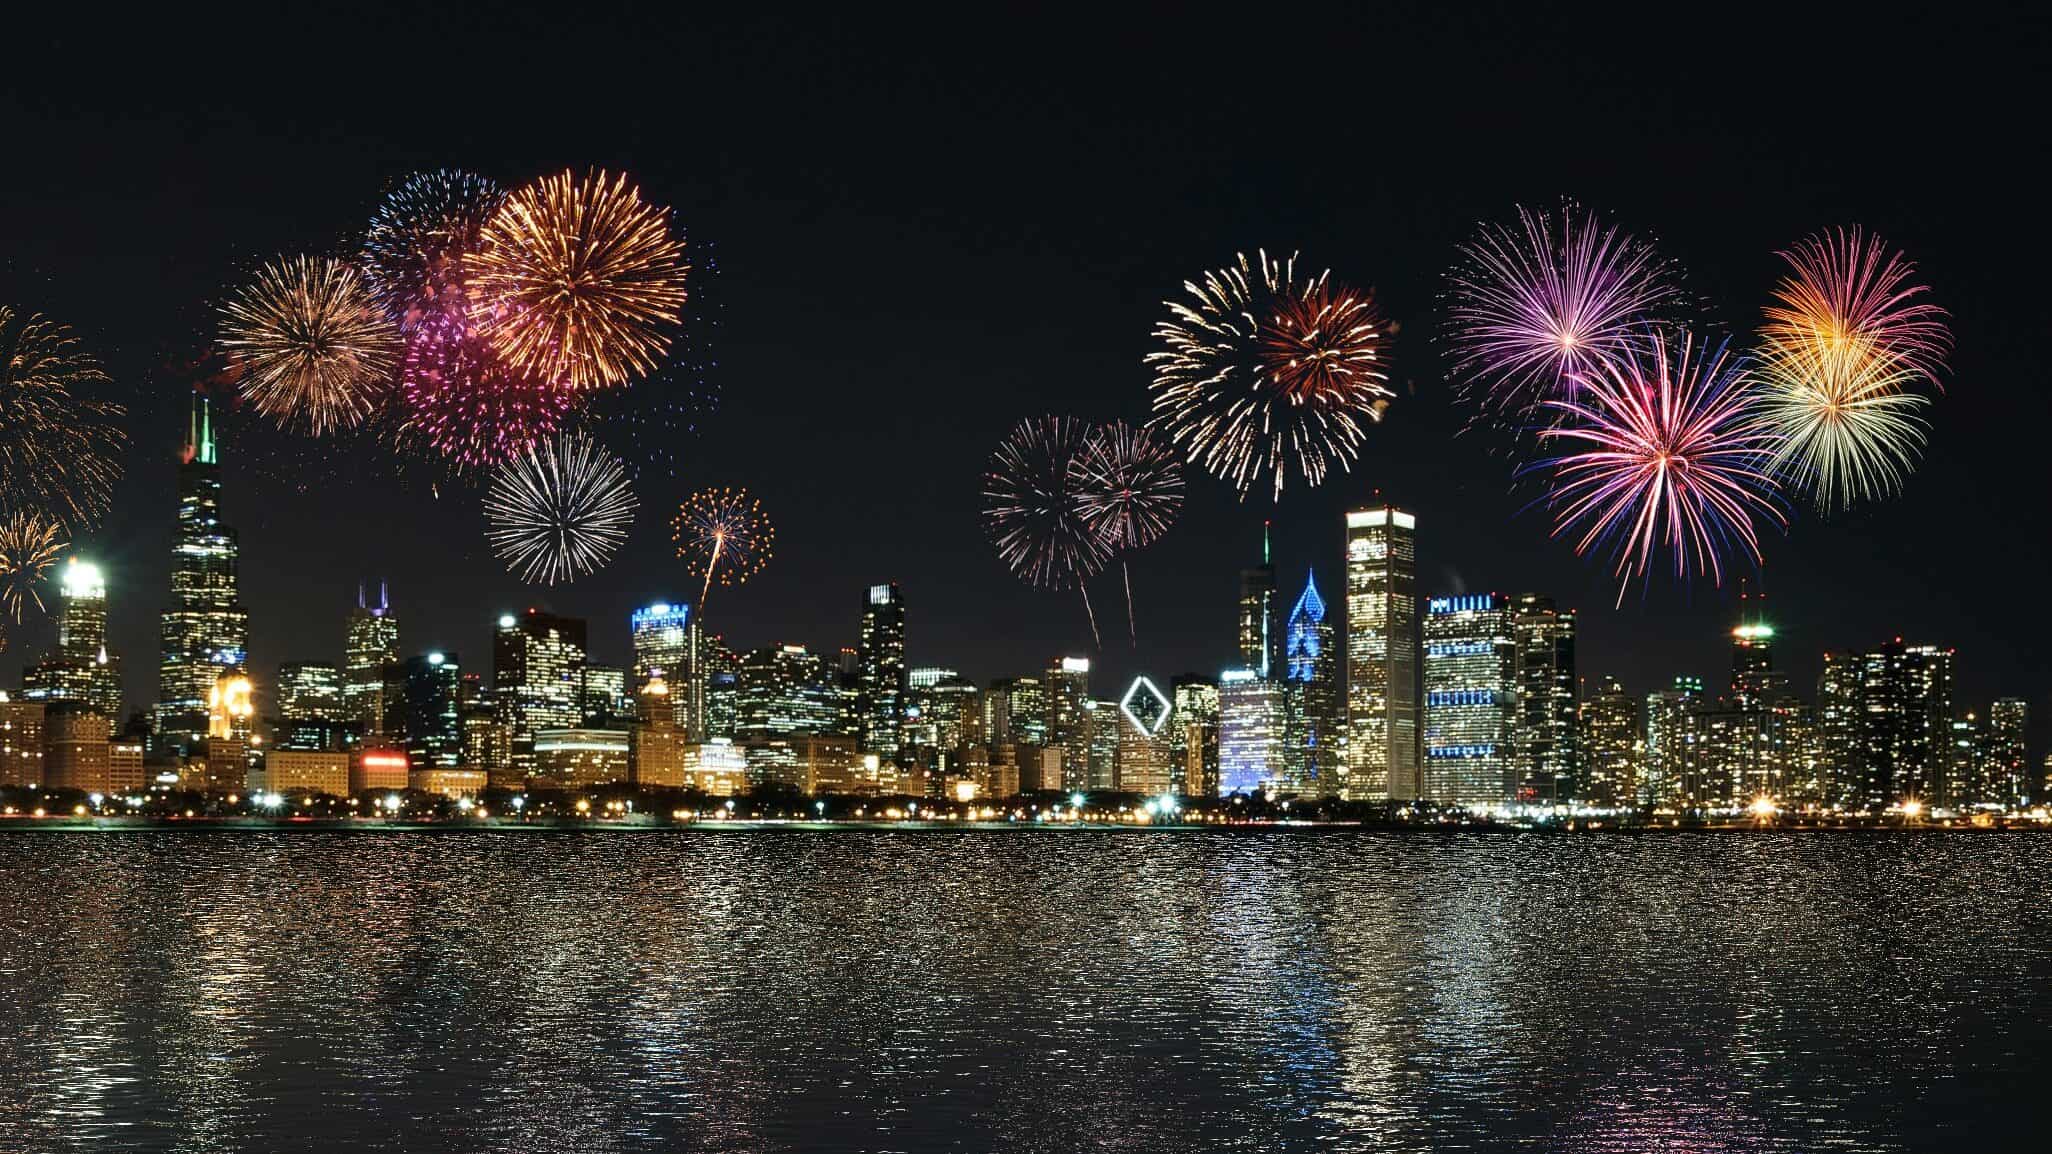 A colorful Fourth of July fireworks display over a cityscape in front of a harbor.